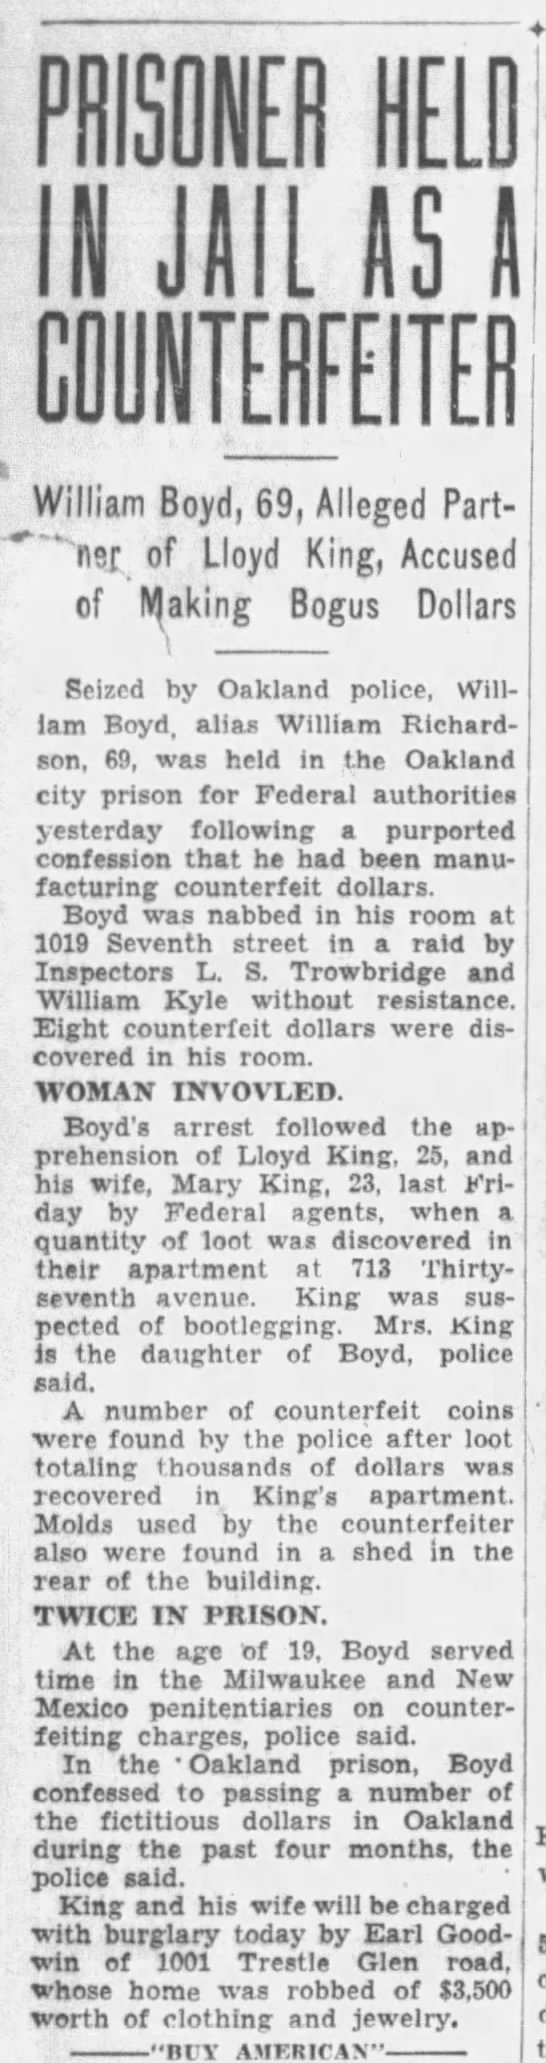 Article about the arrest of William Boyd alias William Richardson, the connection to the burglaries, and his previous arrests